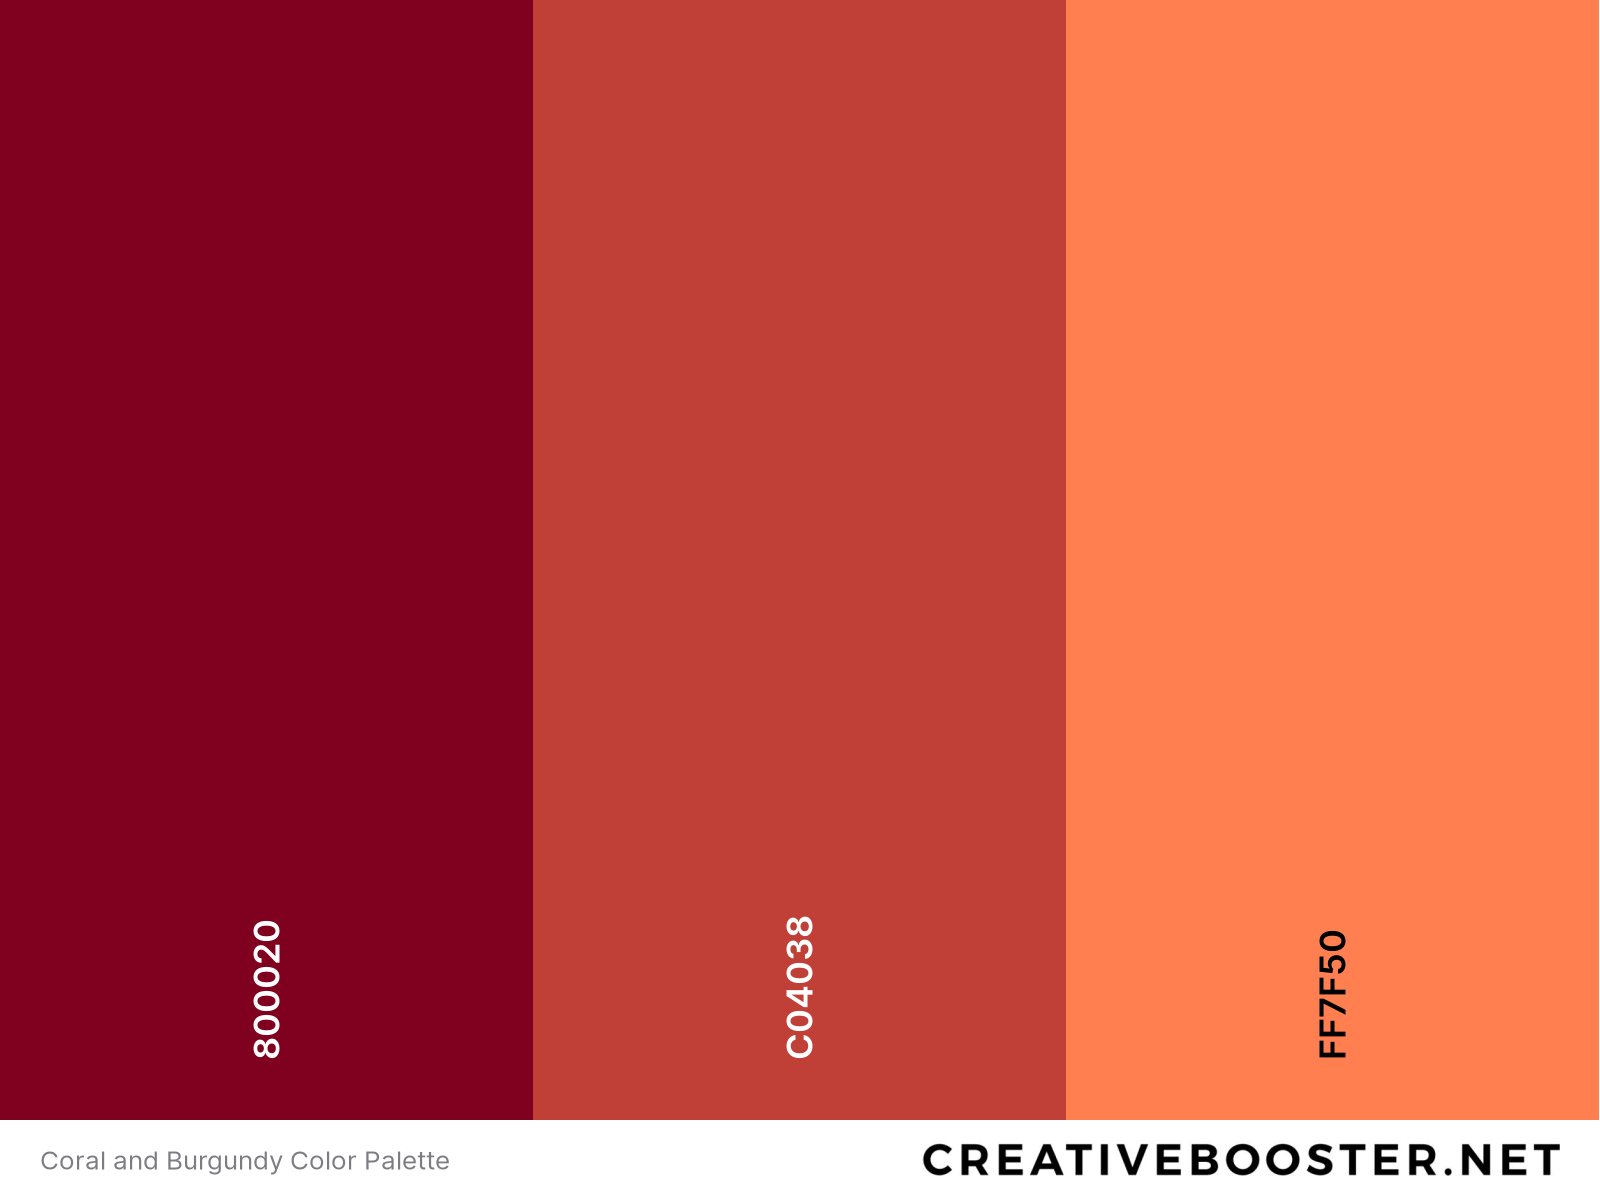 Coral and Burgundy Color Palette